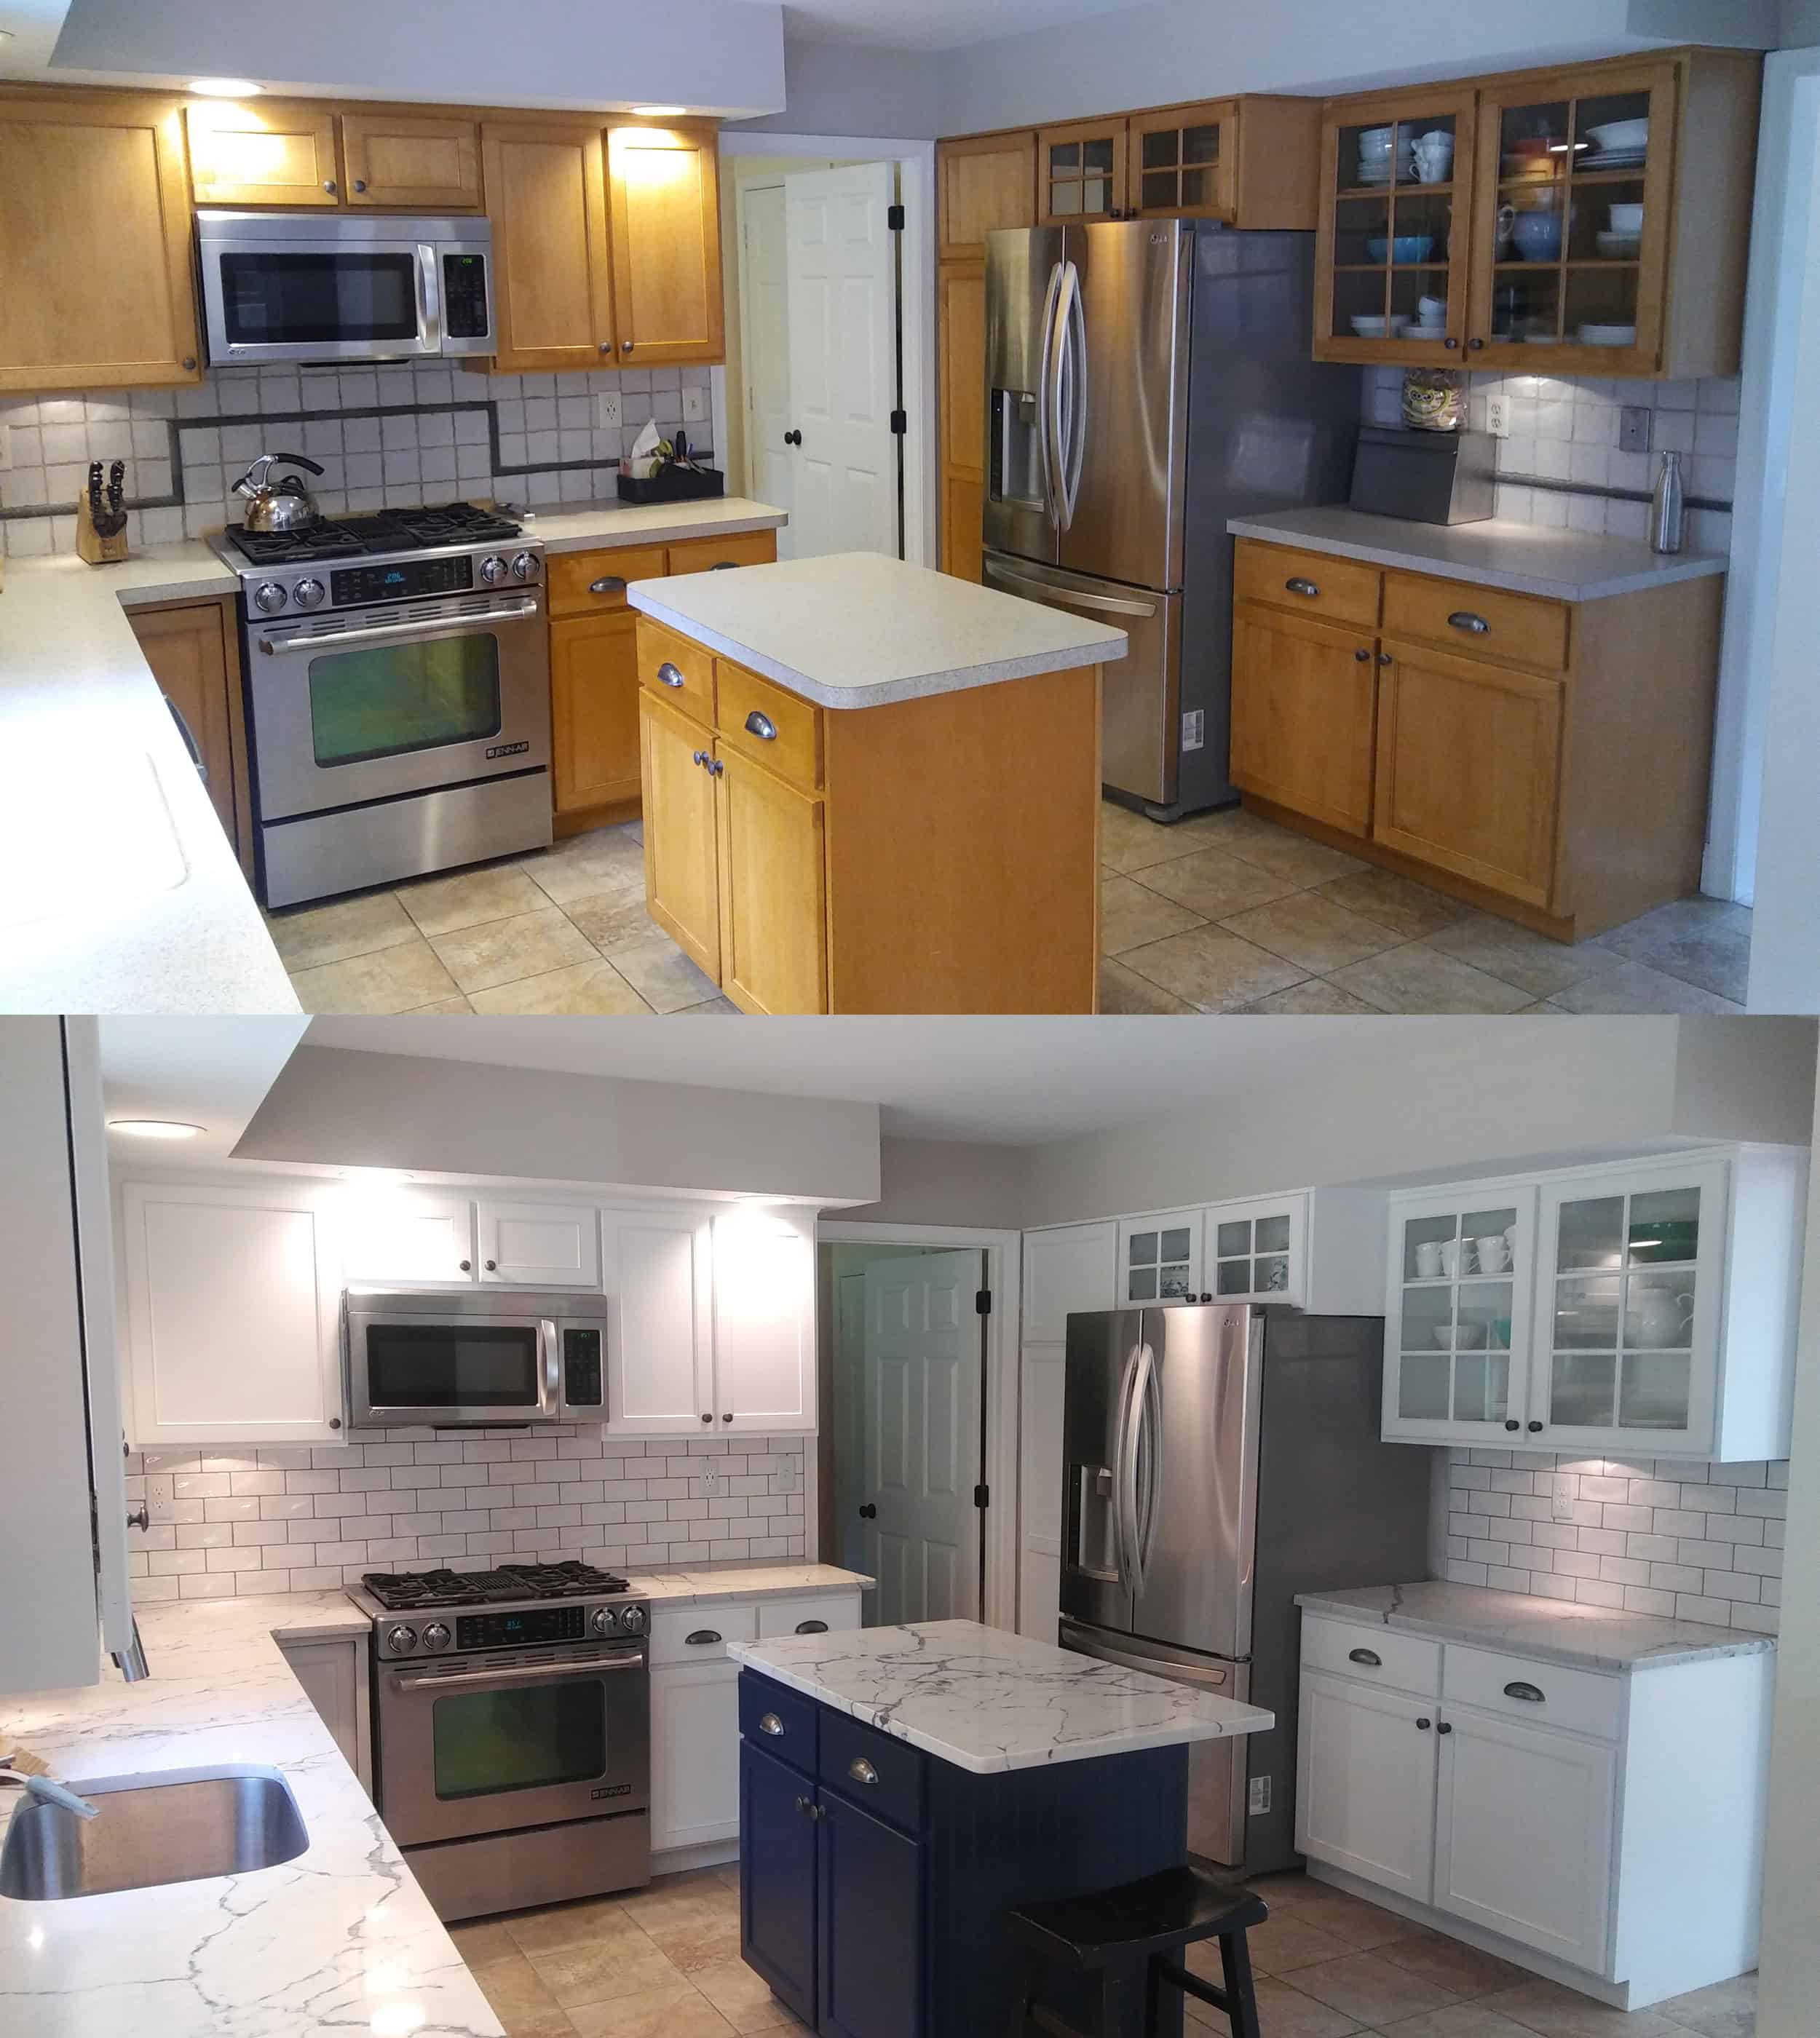 Kitchen Makeover For Client, West Chester PA